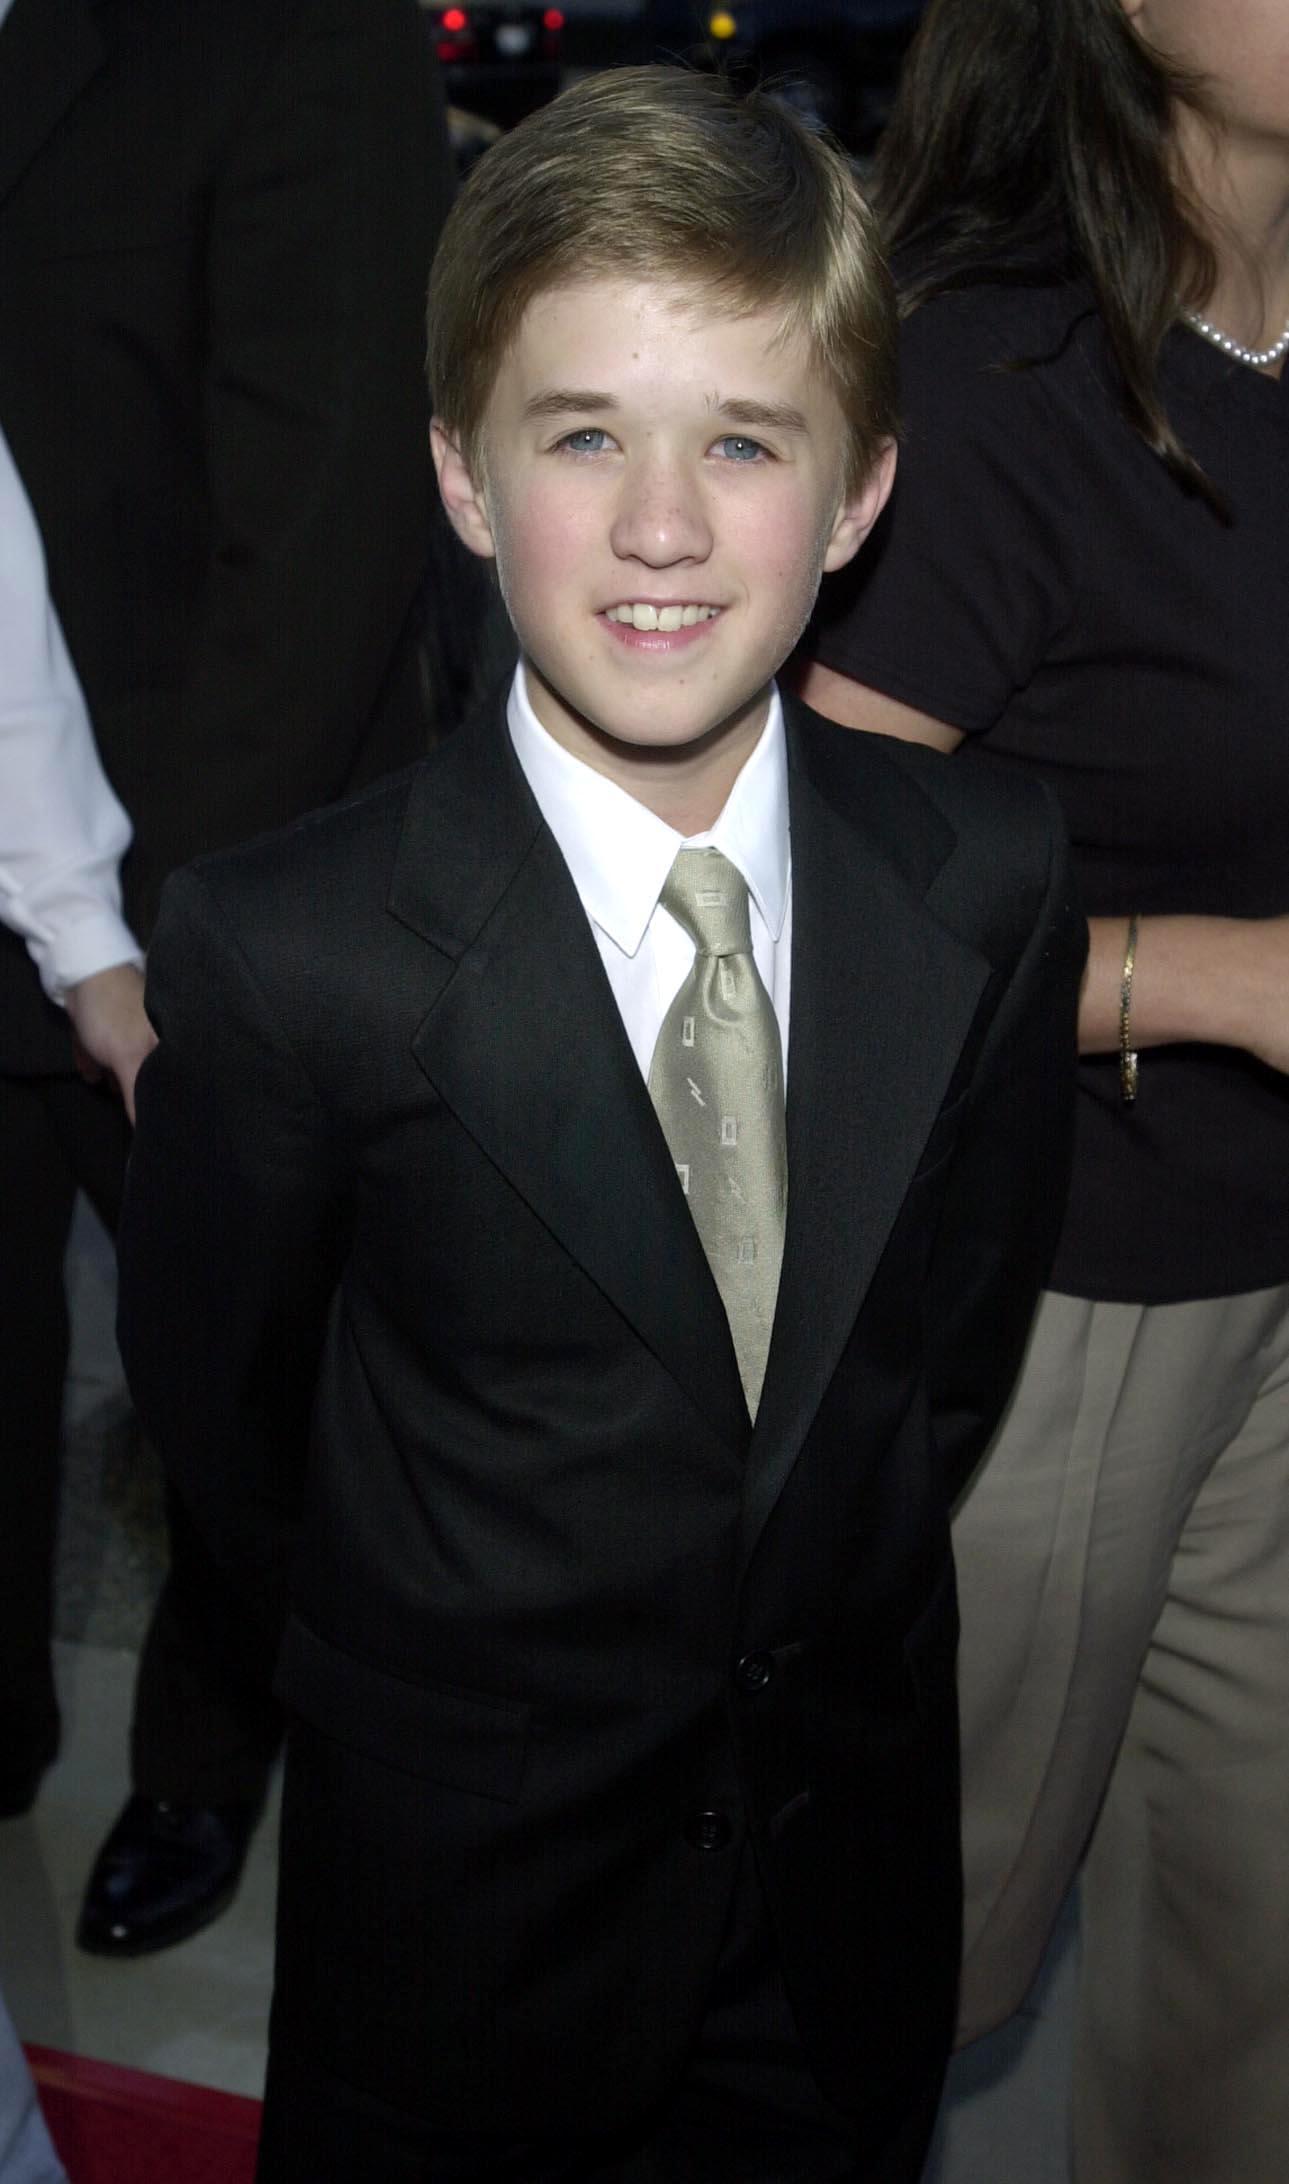 Haley Joel Osment arrives at the Los Angeles premiere of the motion picture "A.I." at the Academy of Motion Picture Arts & Sciences 6/27/01 in Beverly Hills, California.©